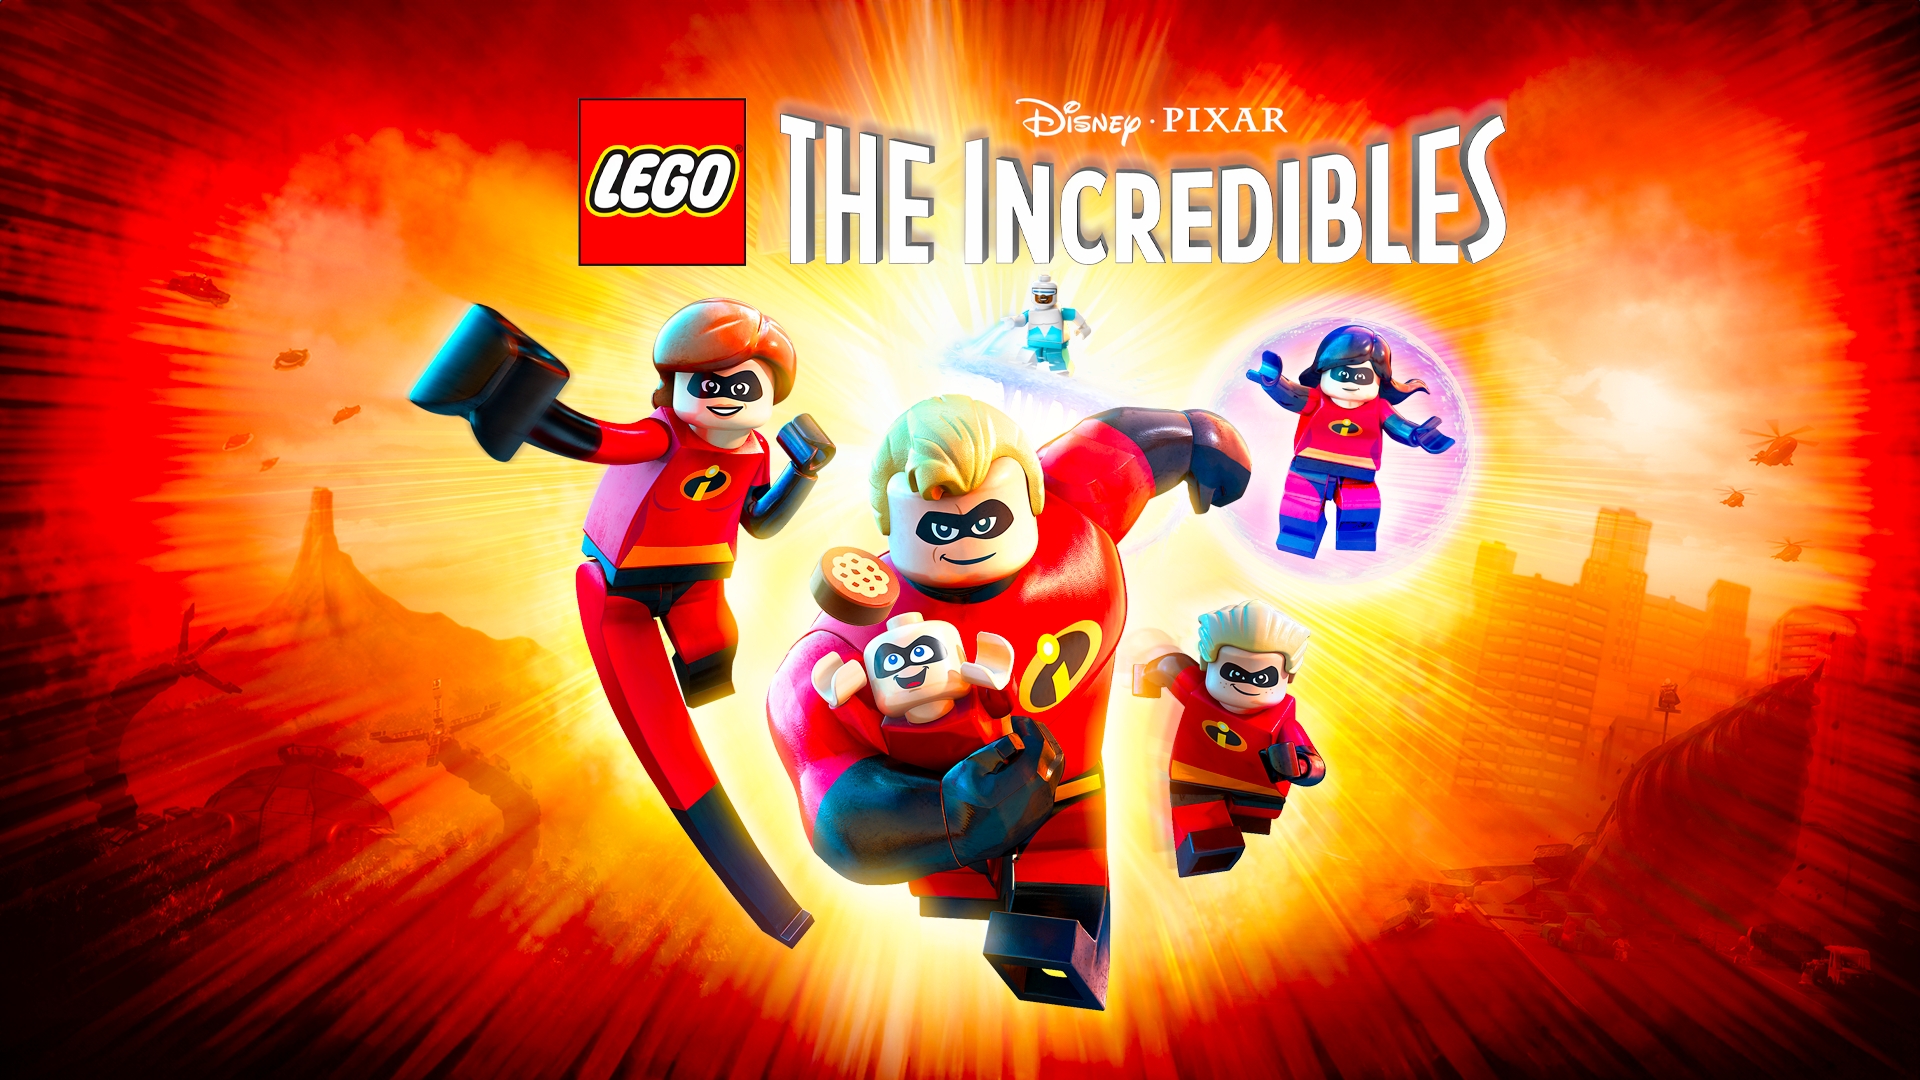 xbox one lego incredibles